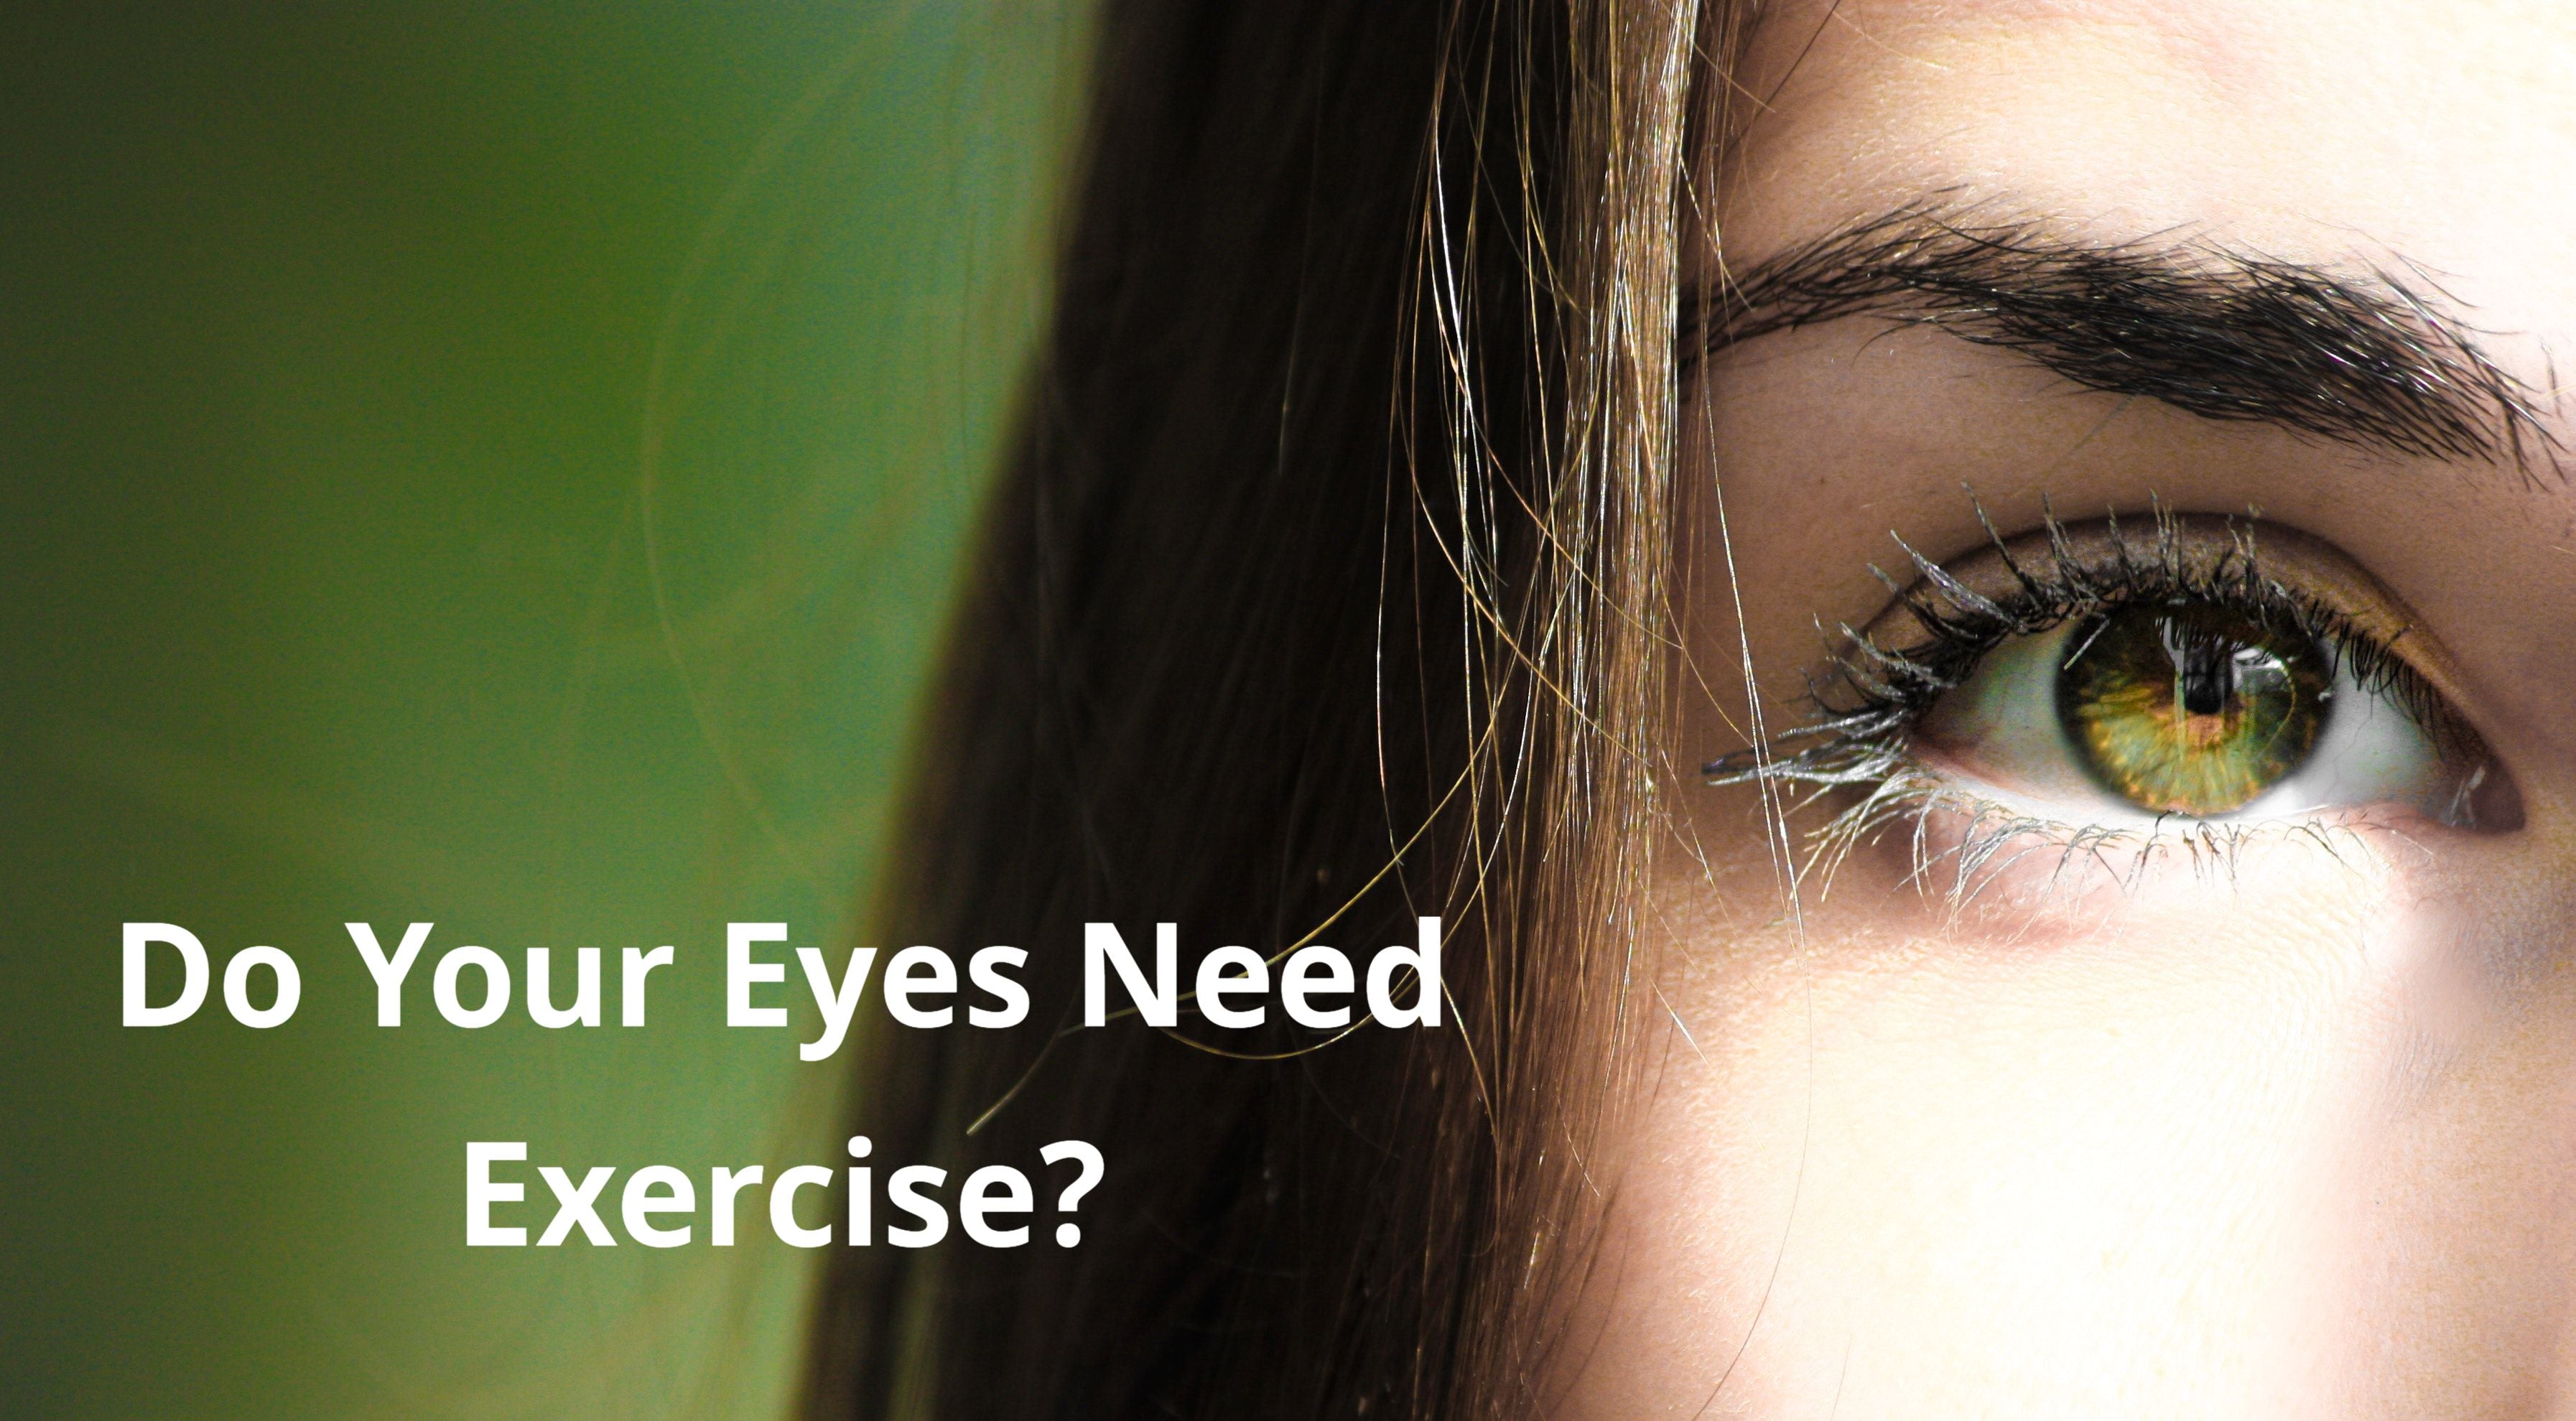 Do Your Eyes Need Exercise?